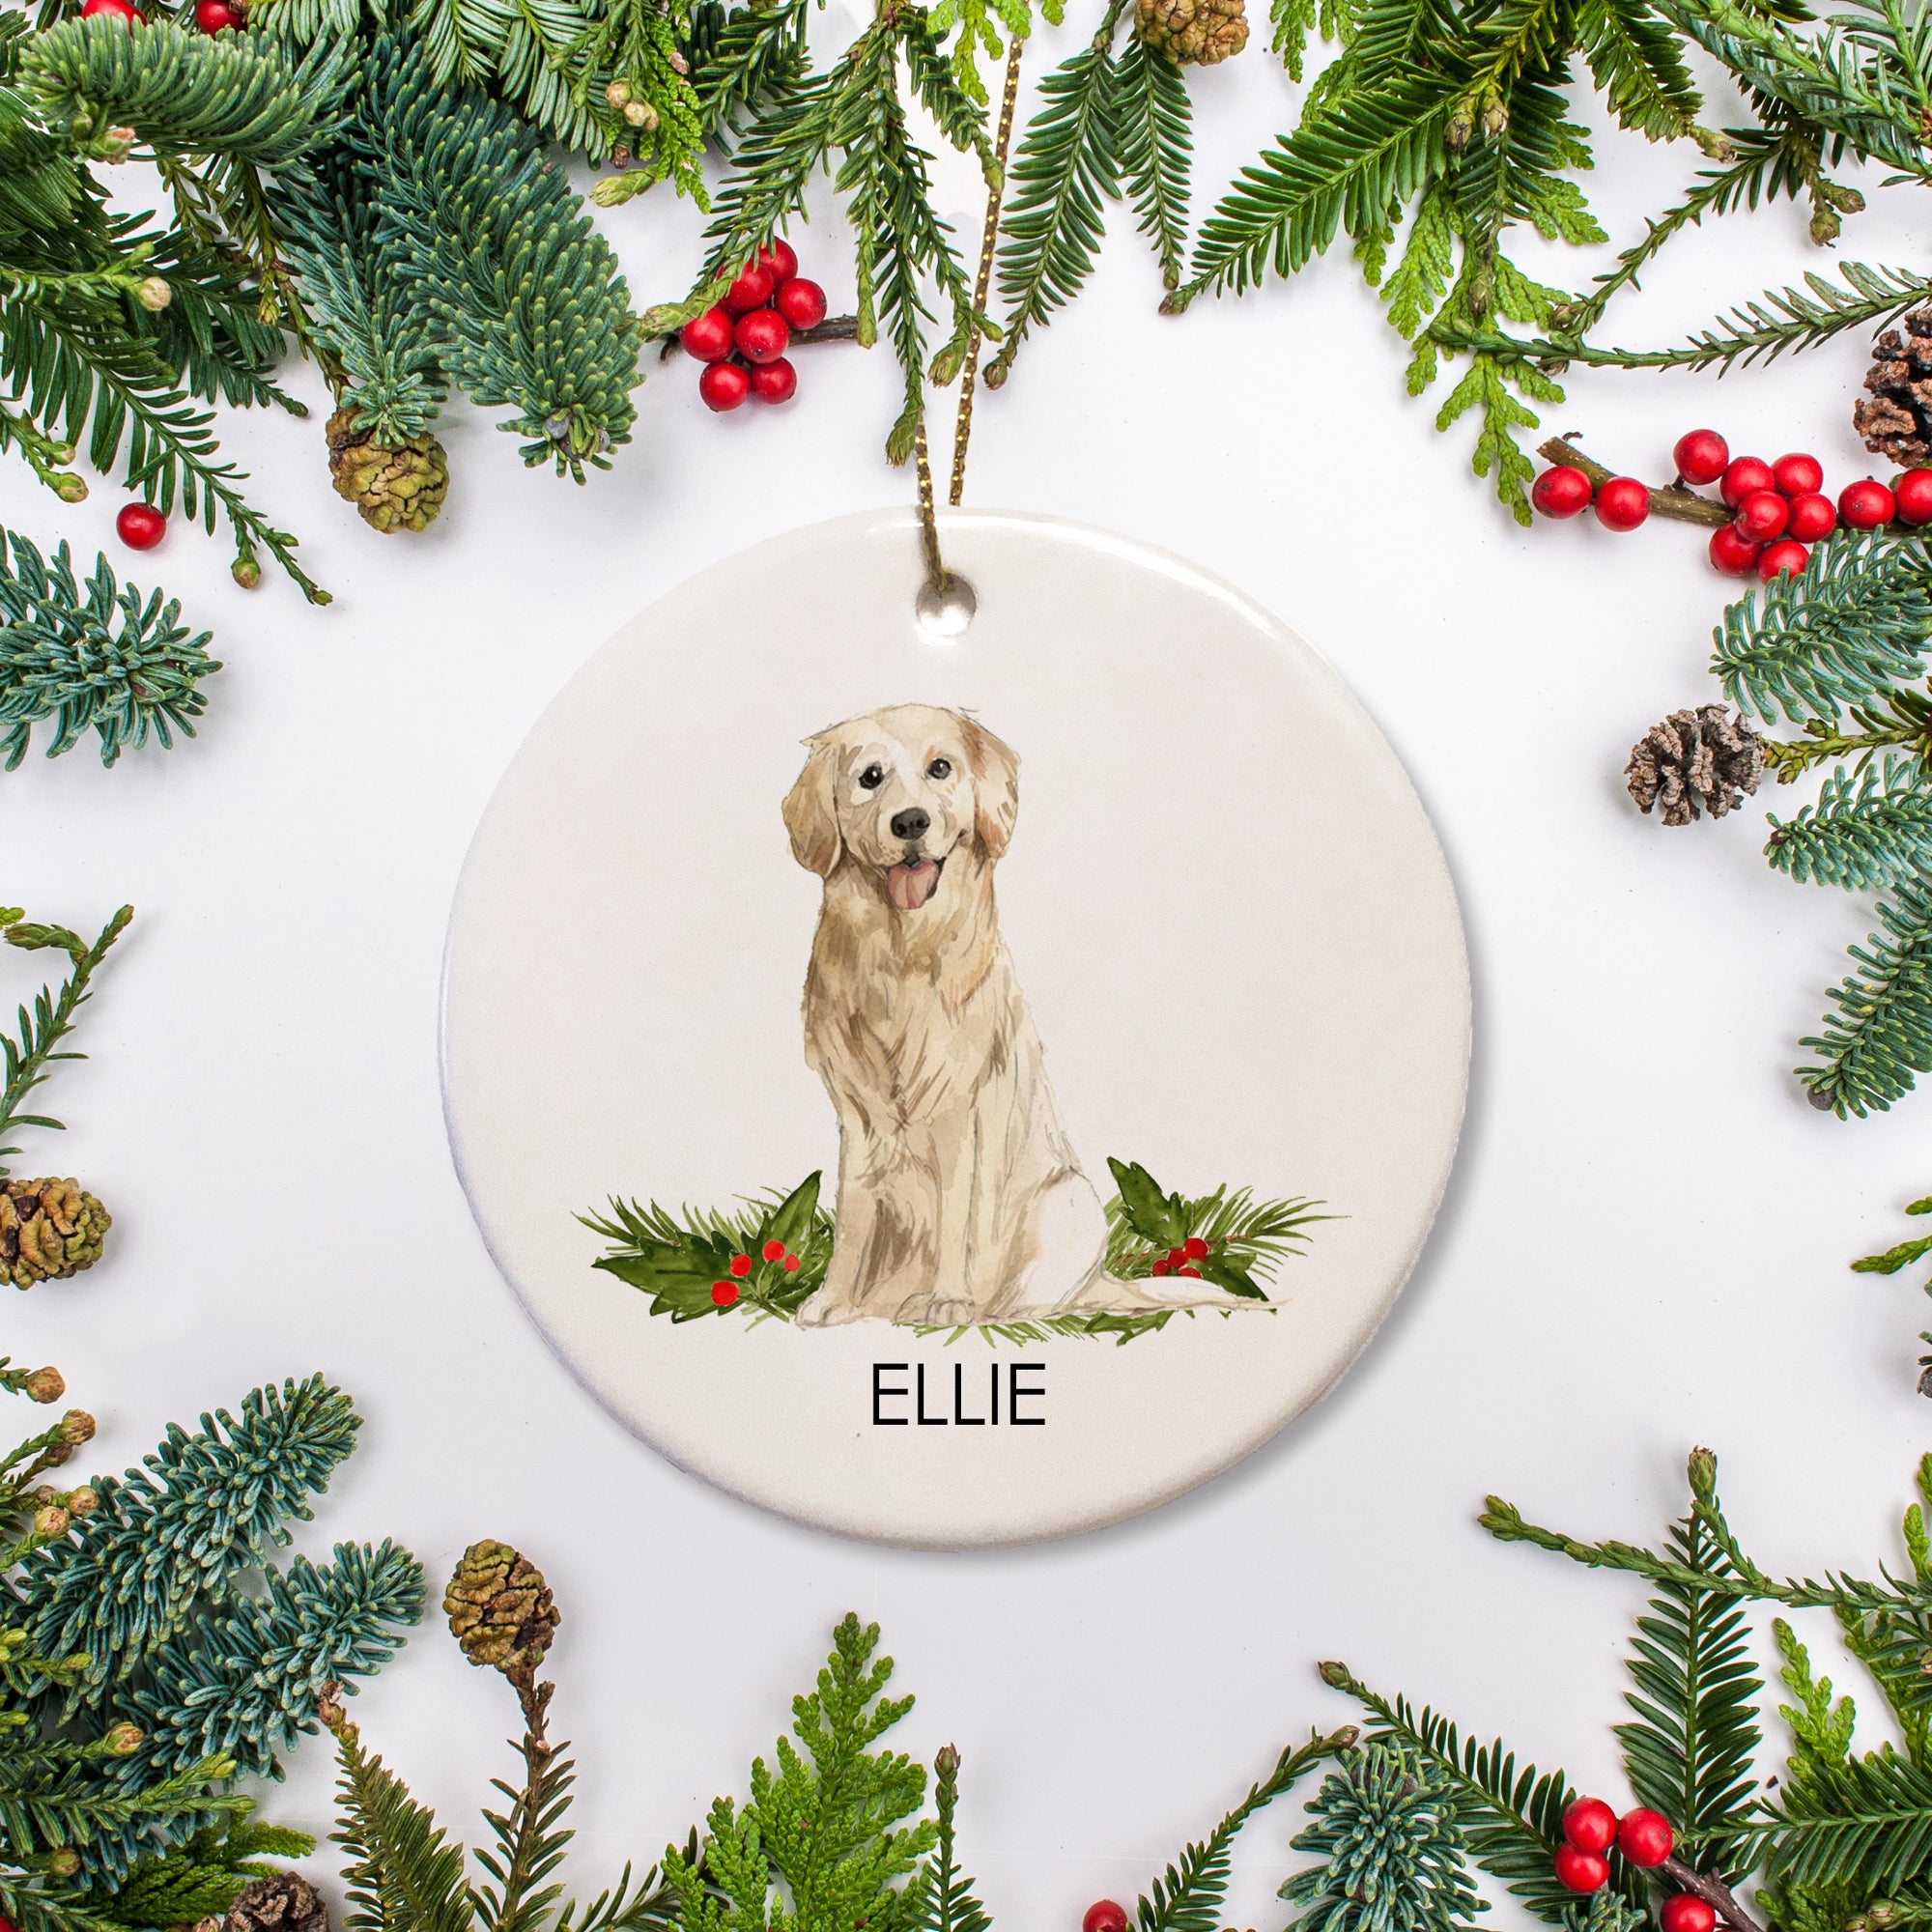 Personalized Dog Christmas Ornament, featuring a golden labrador retriever sitting on a bed of holly